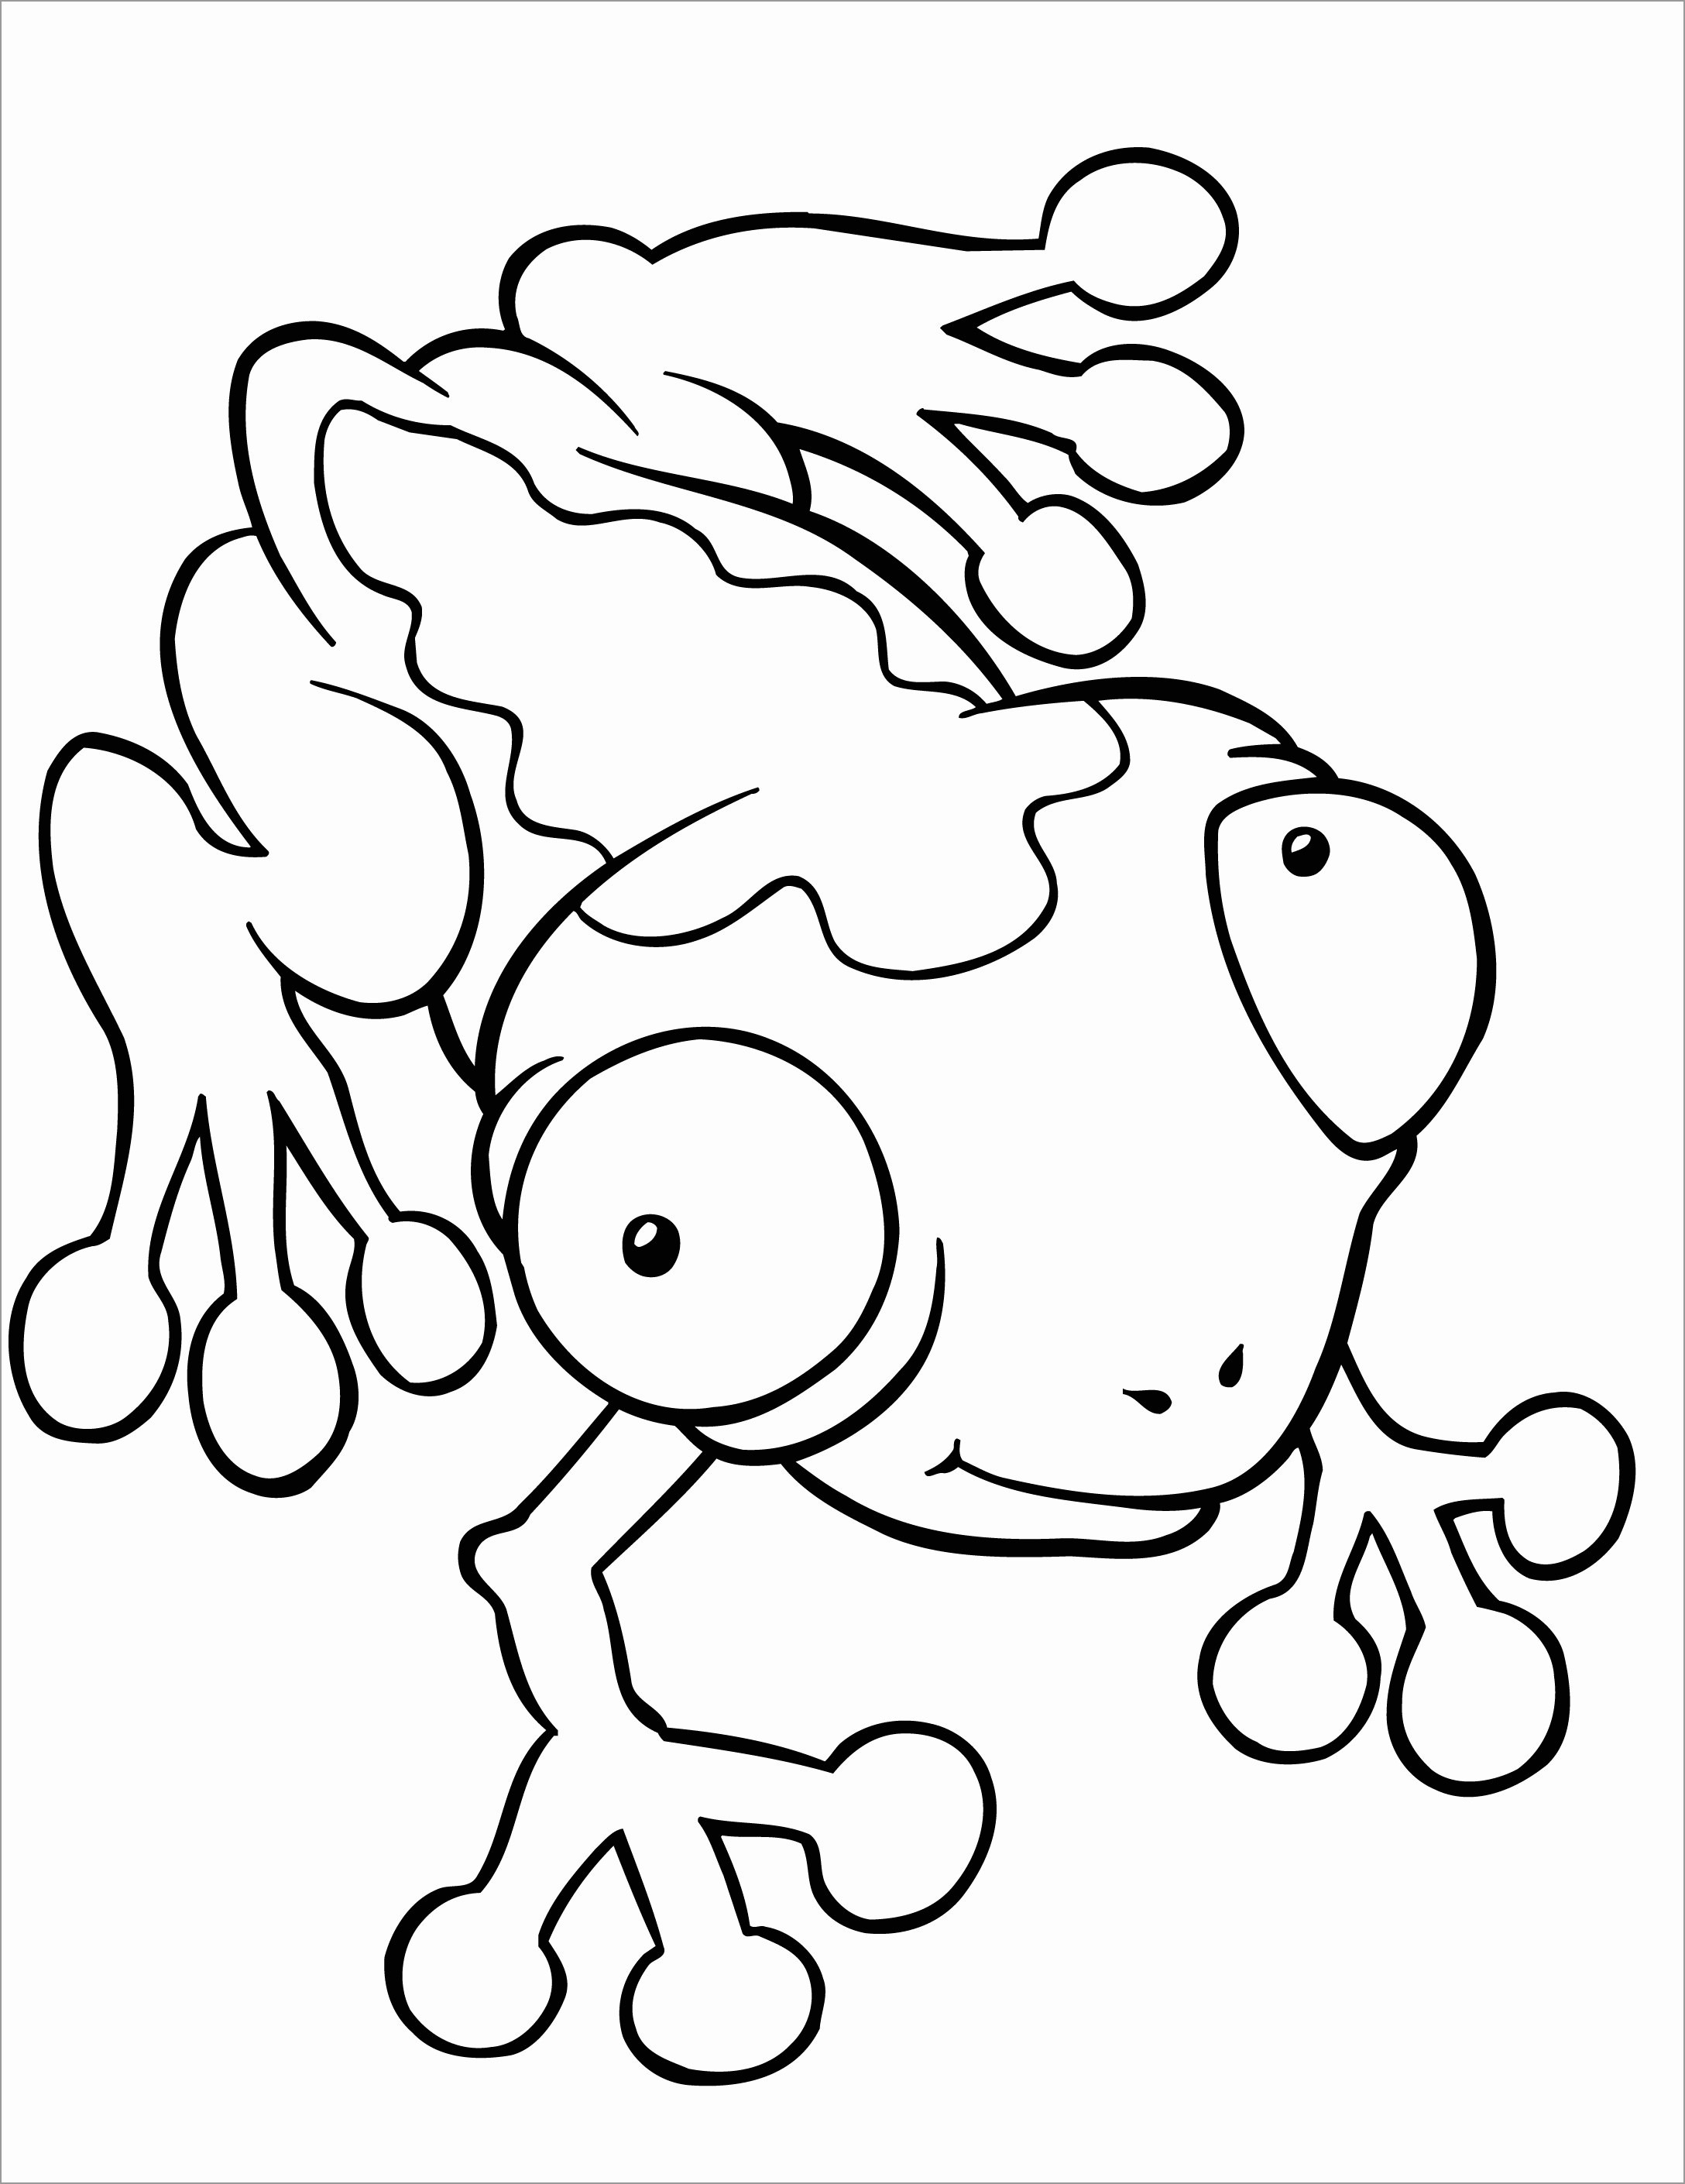 Funny toad Coloring Page